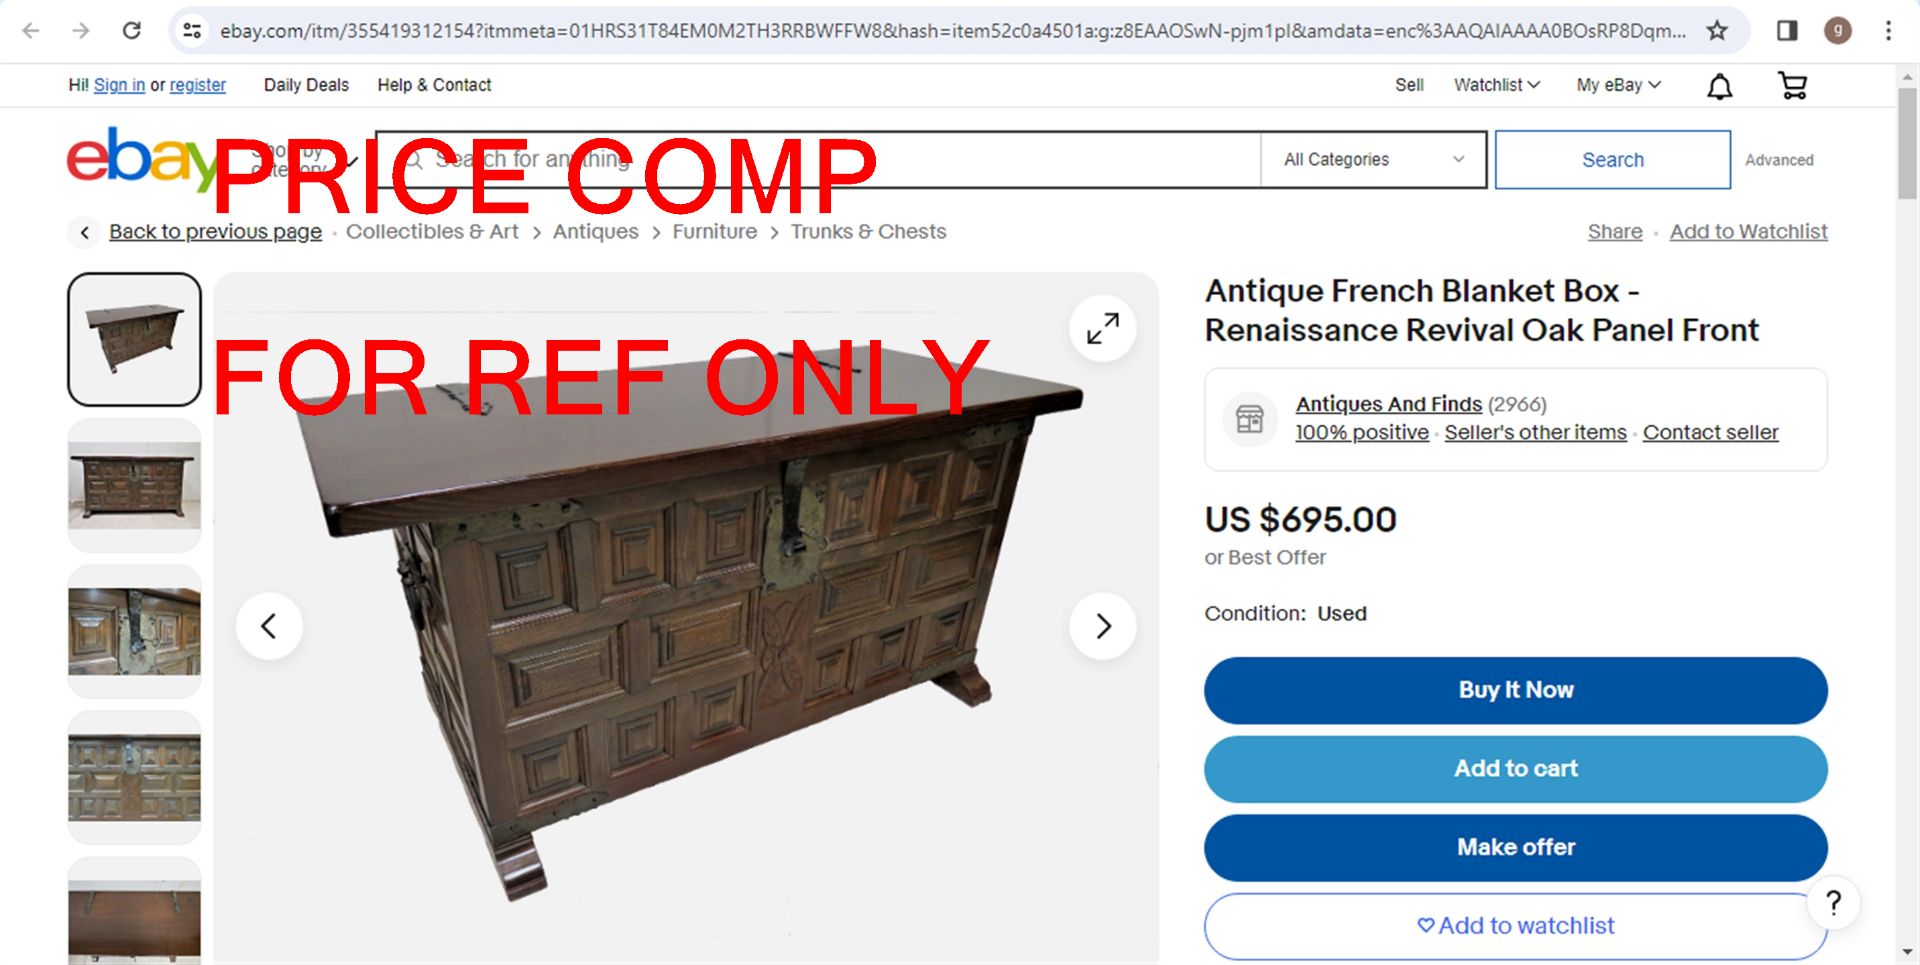 Cool Old Furniture- (LOADING FEE - $25) - Image 7 of 9